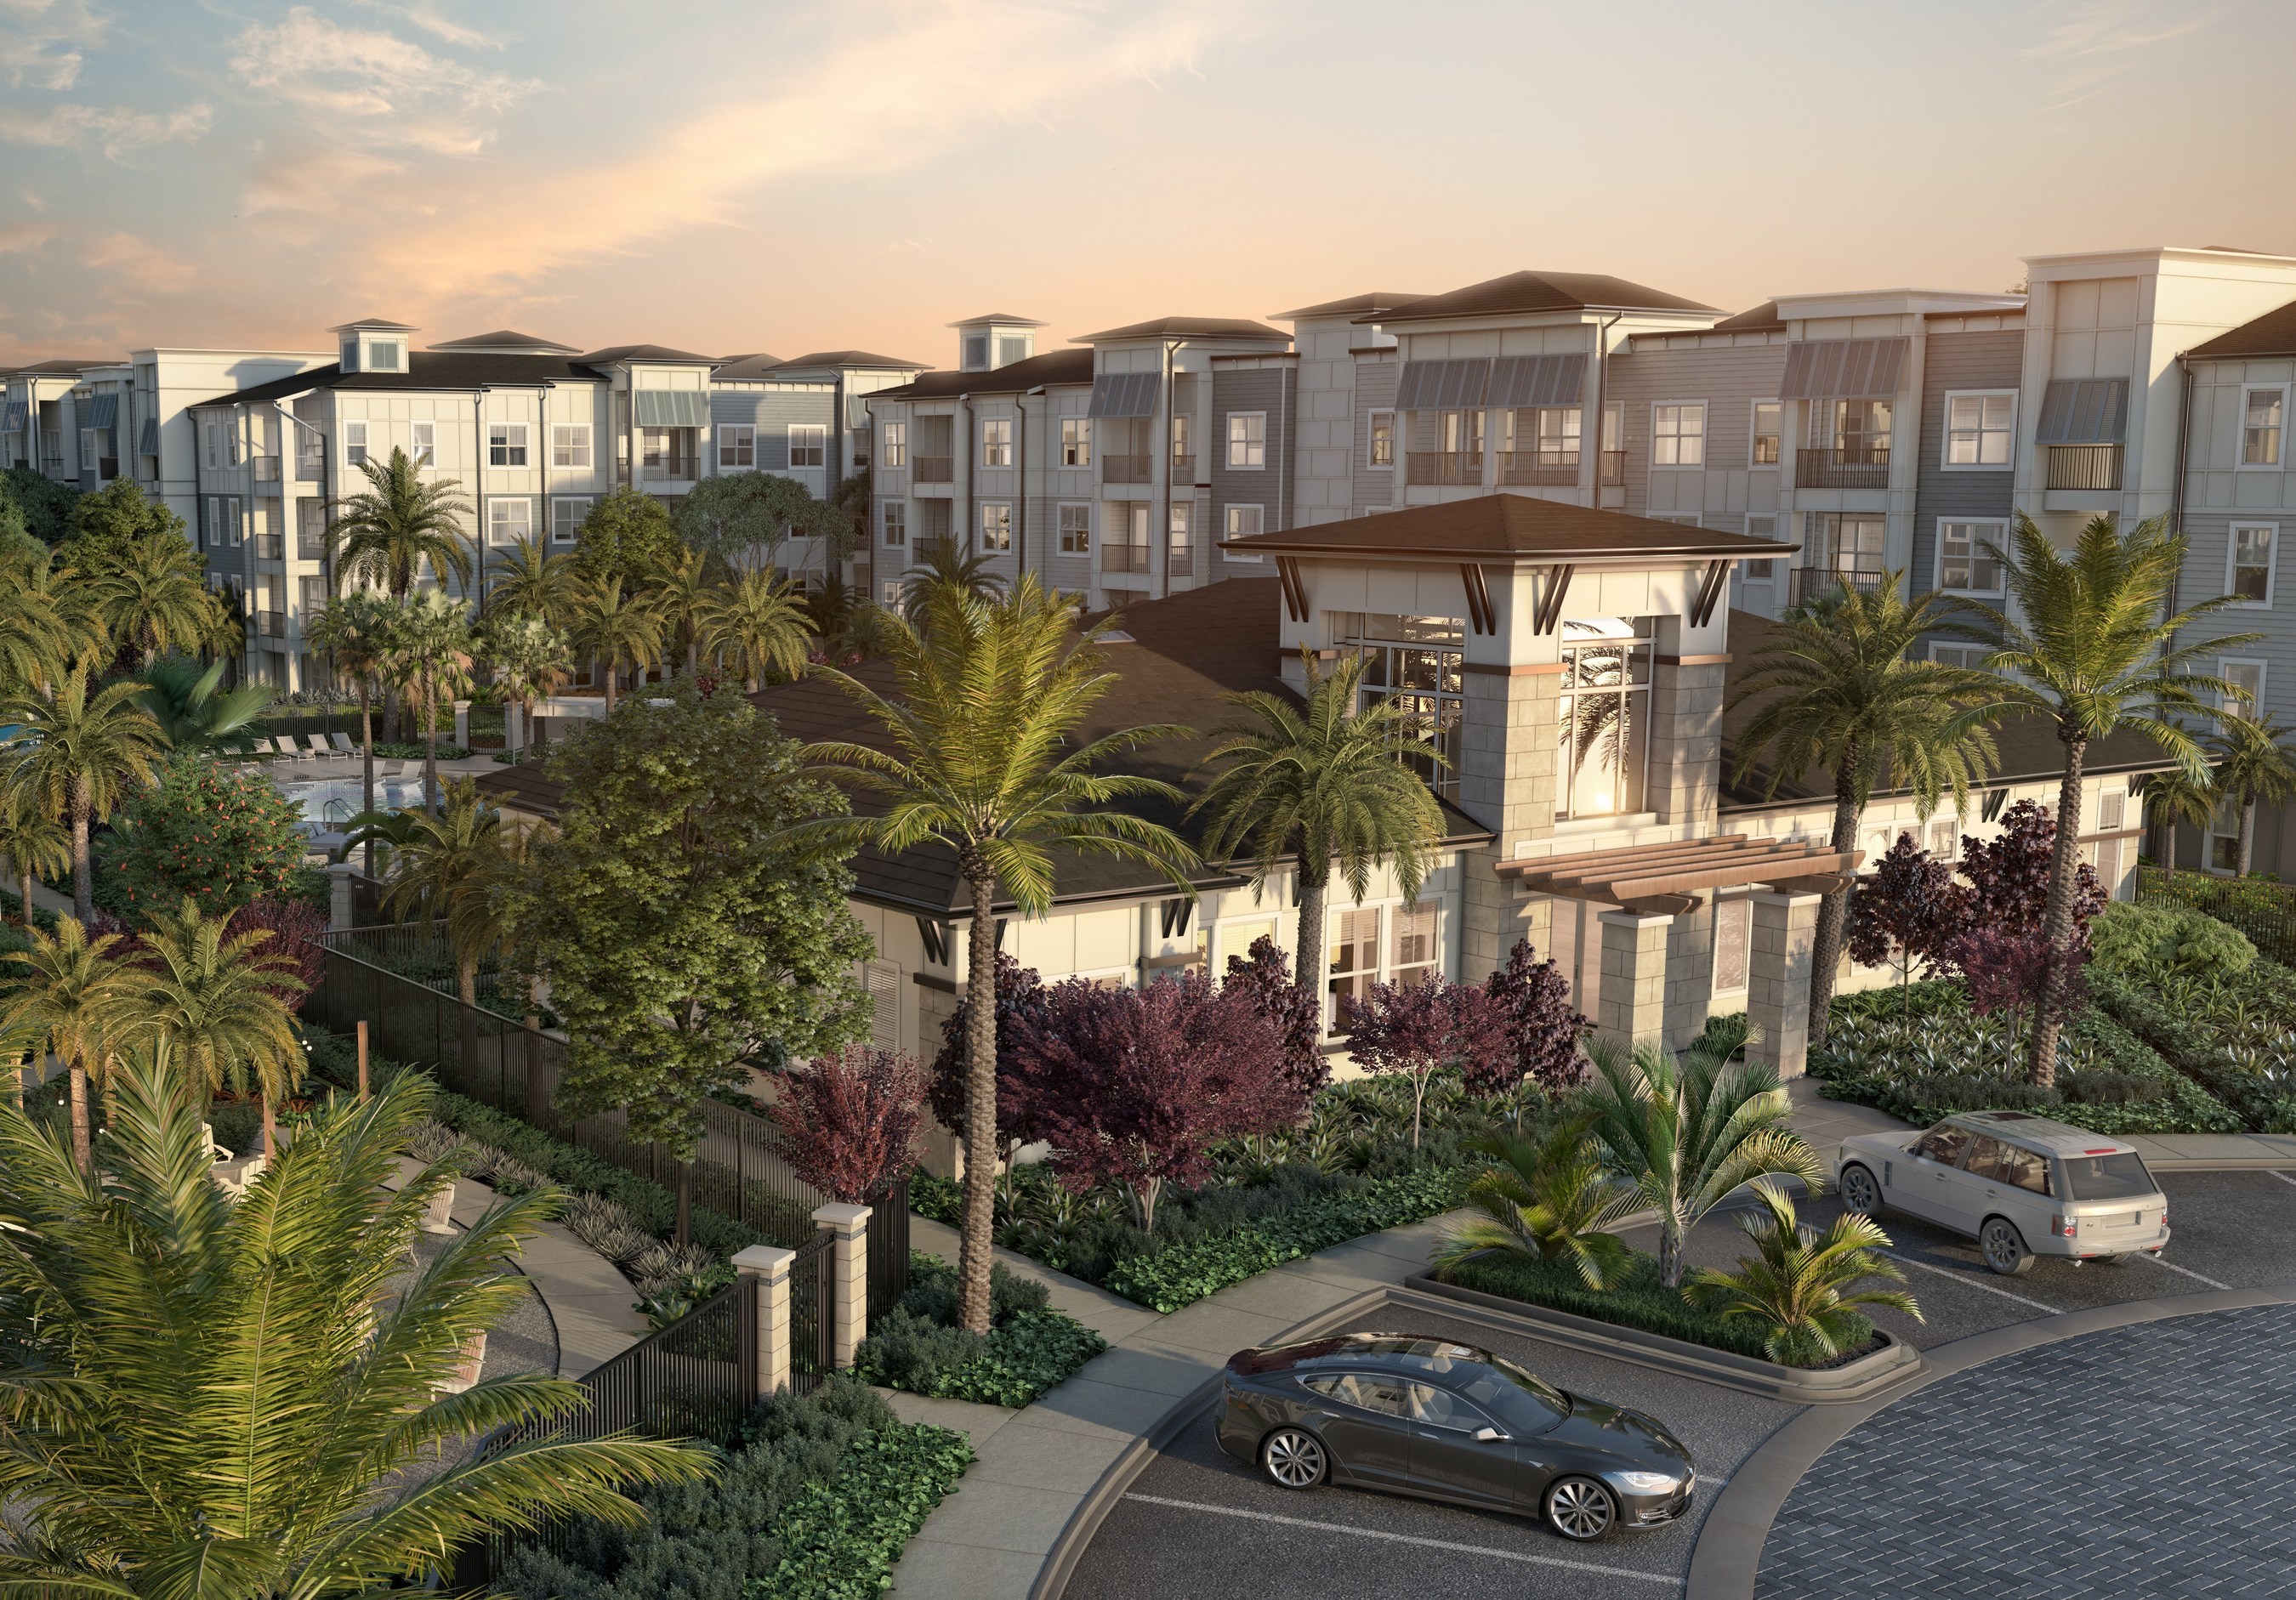 Aventon Companies Continues West Coast Florida Growth With a New 360-Unit Apartment Community Set to Debut in Tampa Bay Region